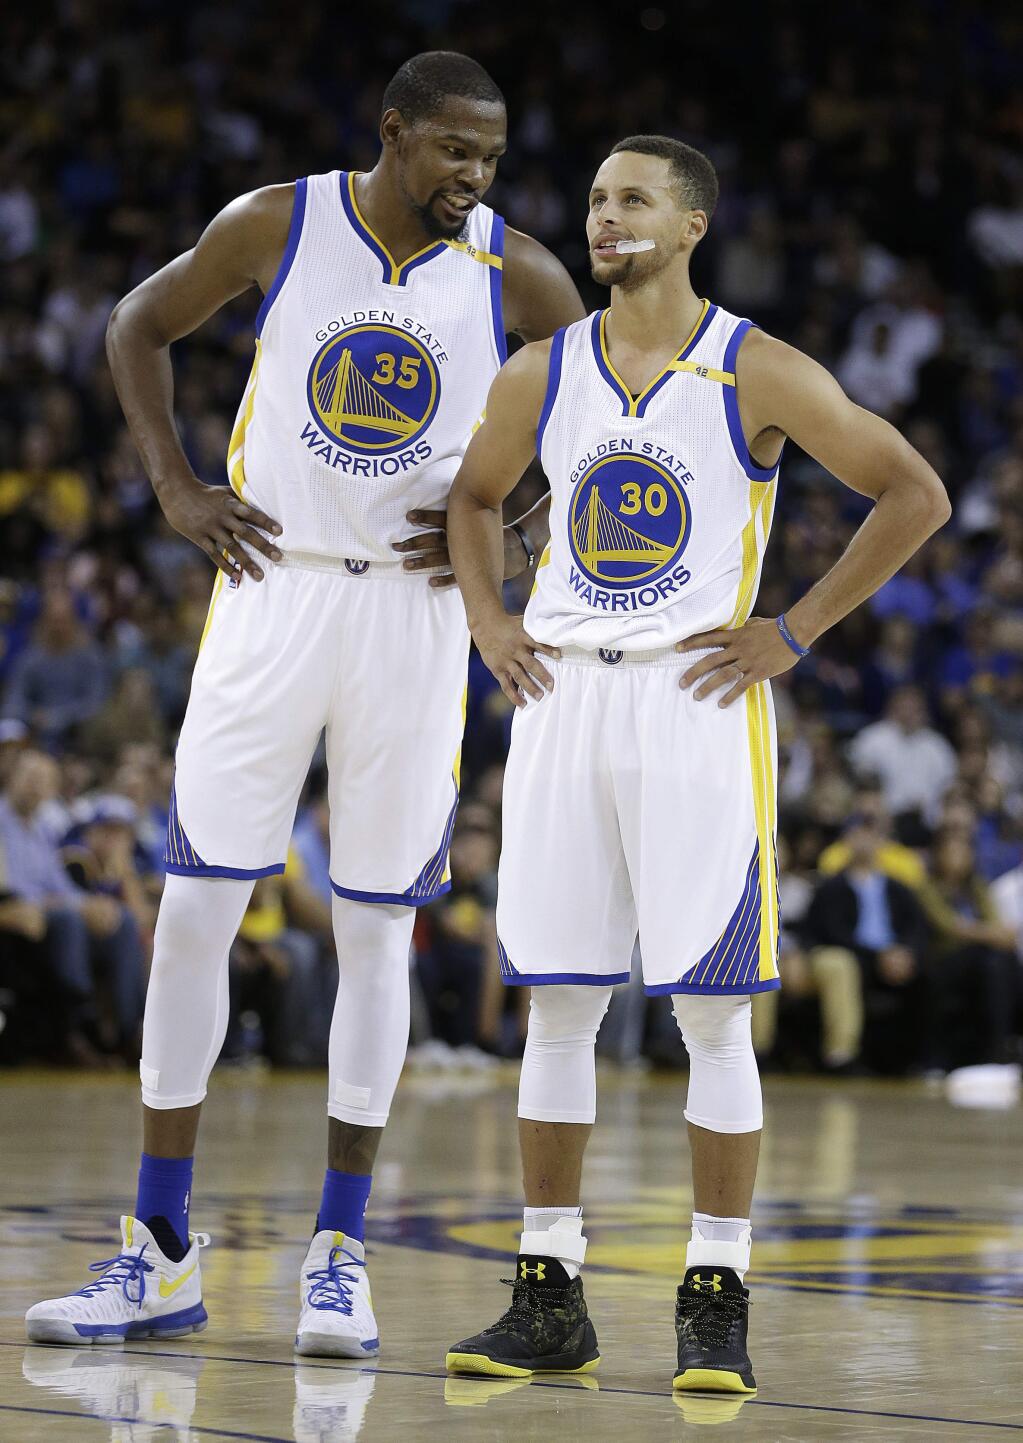 Golden State Warriors' Kevin Durant, left, speaks with Stephen Curry (30) during the first half of a pre-season NBA basketball game against the Los Angeles Clippers on Tuesday, Oct. 4, 2016, in Oakland, Calif. (AP Photo/Ben Margot)